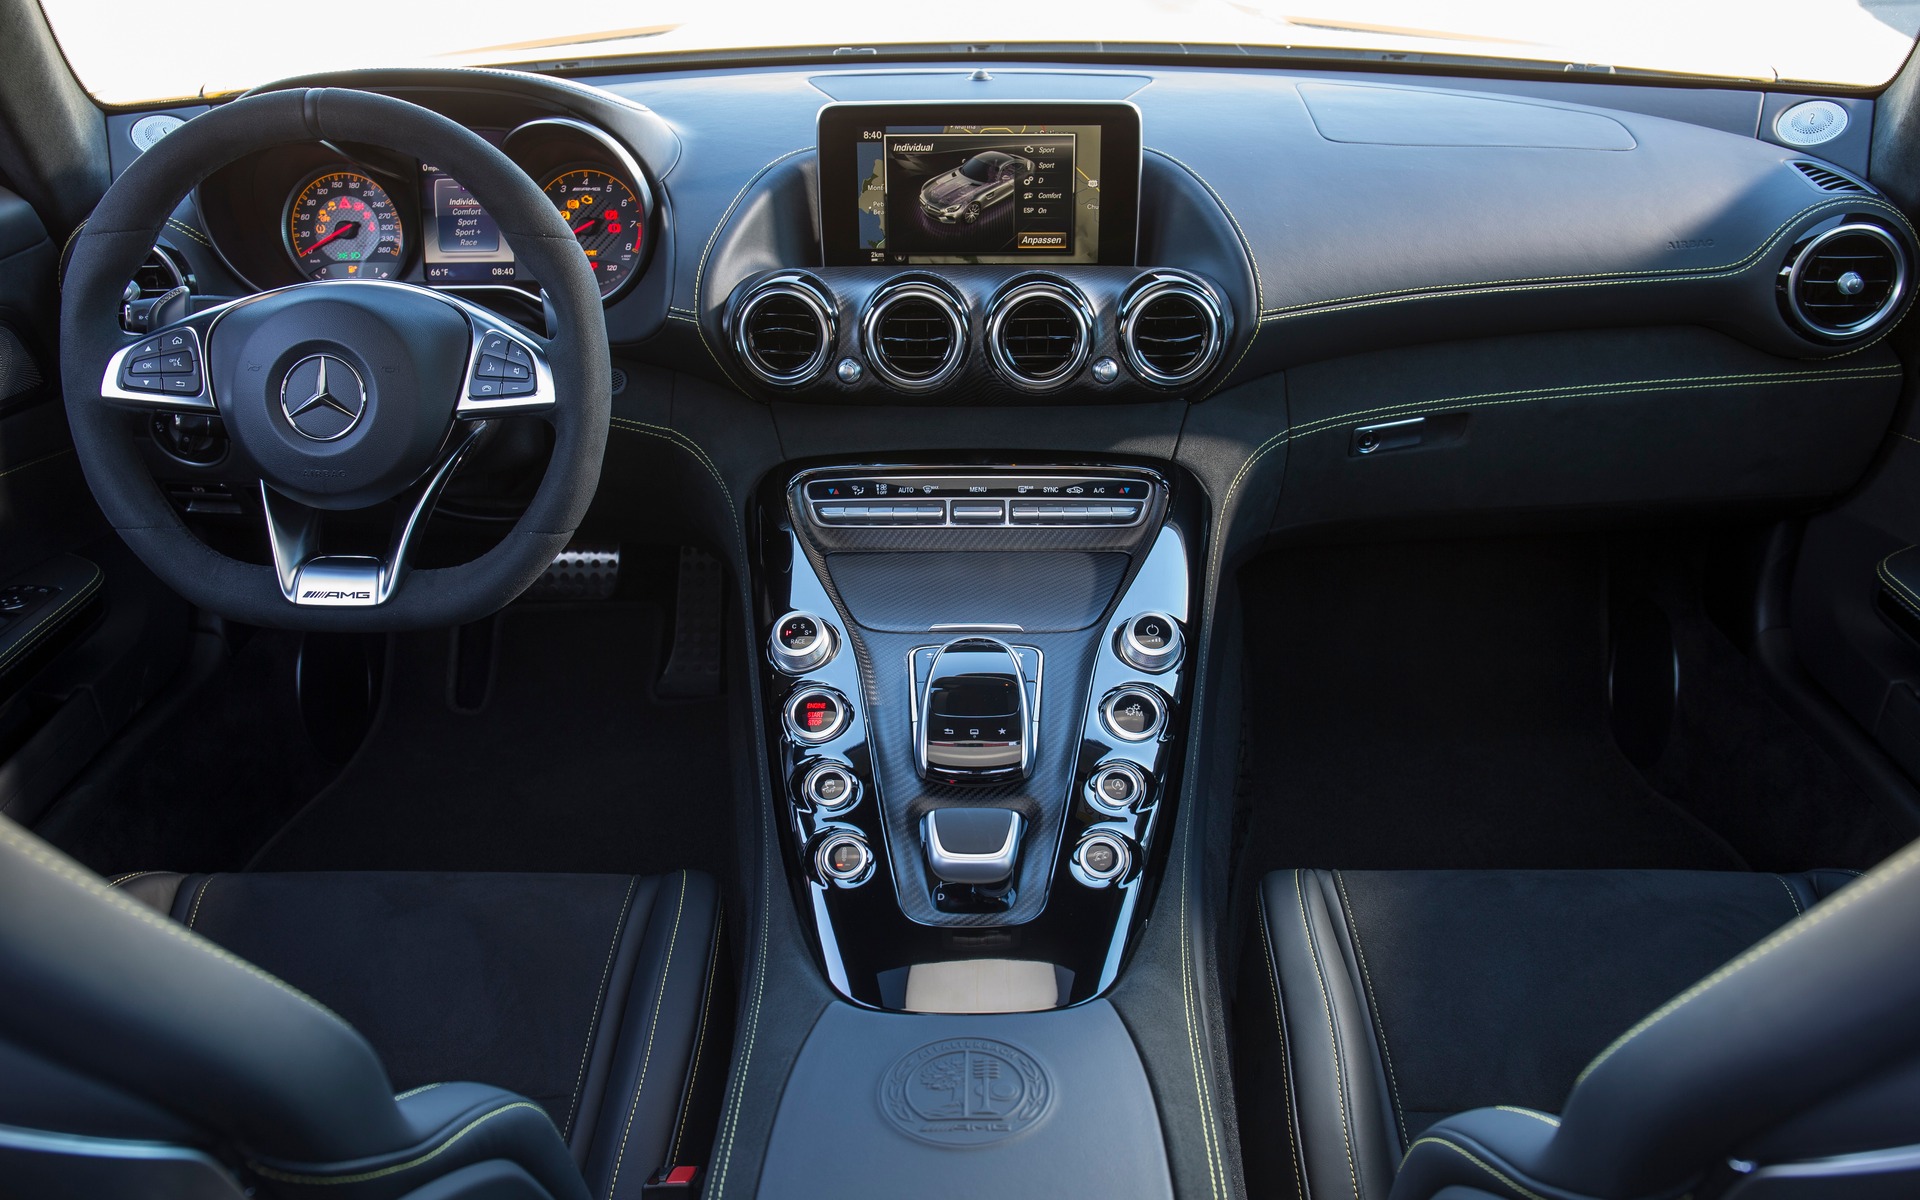 The dash is straightforward and the instrumentation is logical.